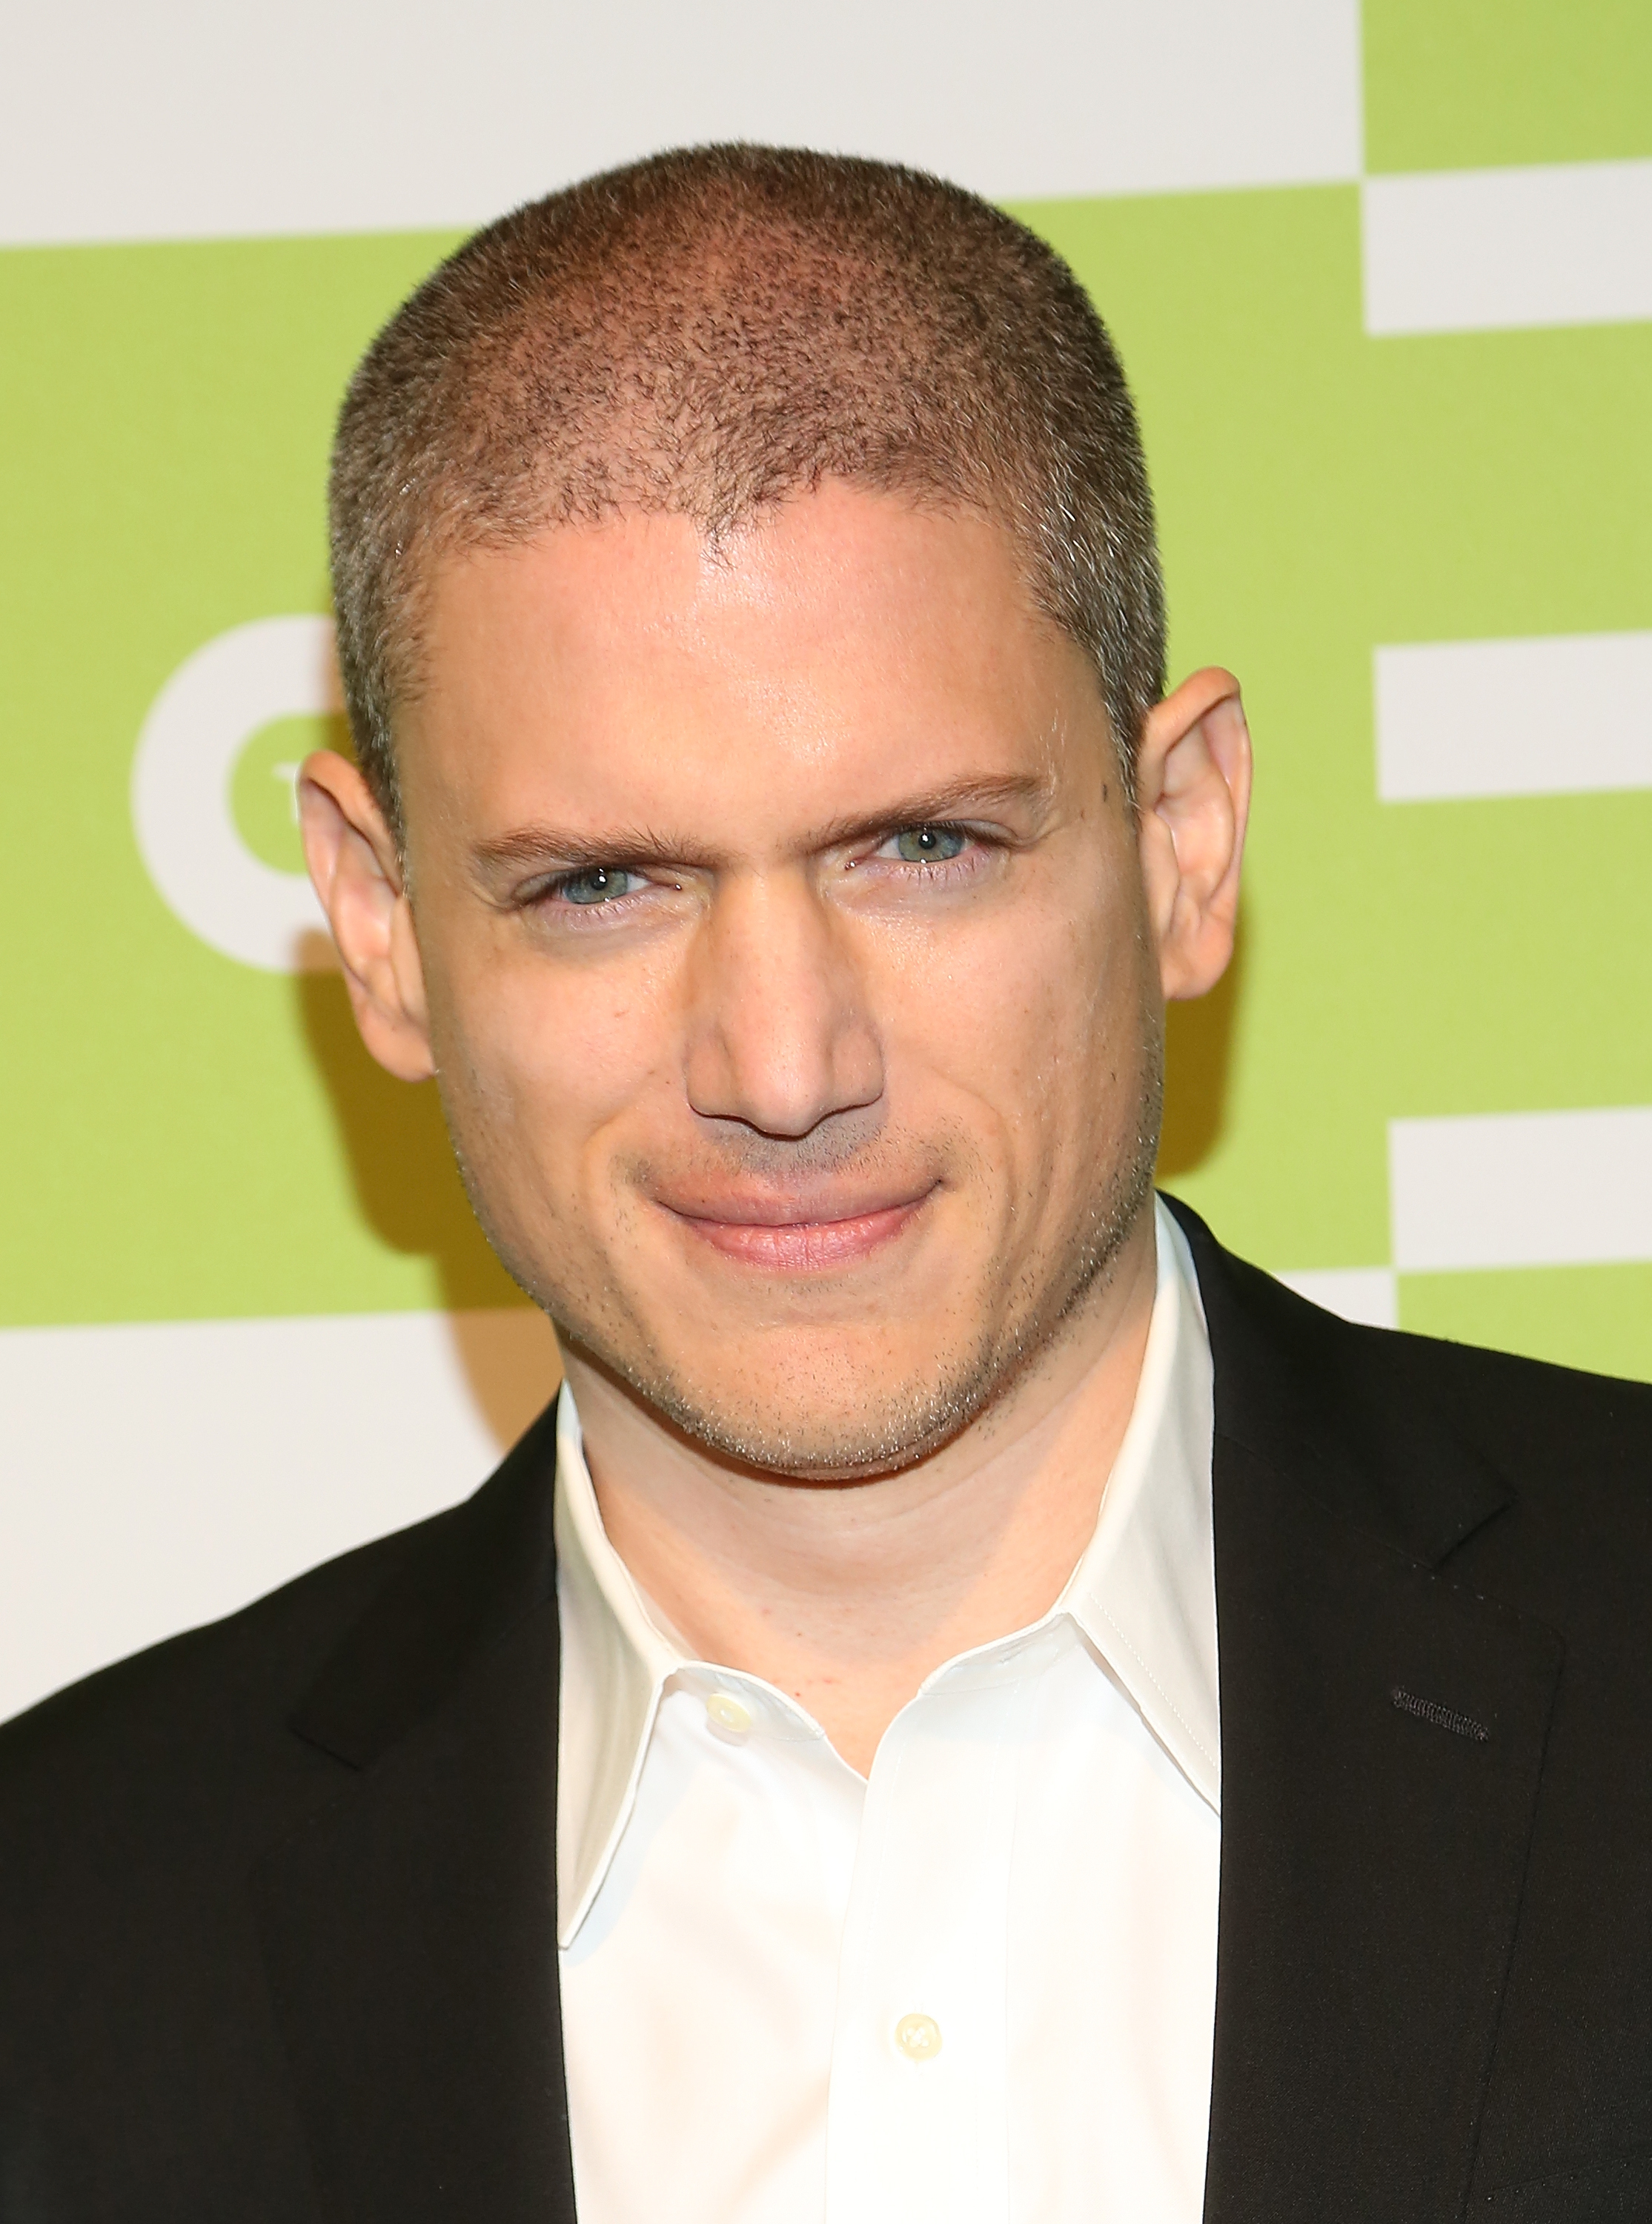 Actor Wentworth Miller attends The CW Network's New York 2015 Upfront Presentation at The London Hotel on May 14, 2015 in New York City. (Monica Schipper—Getty Images)